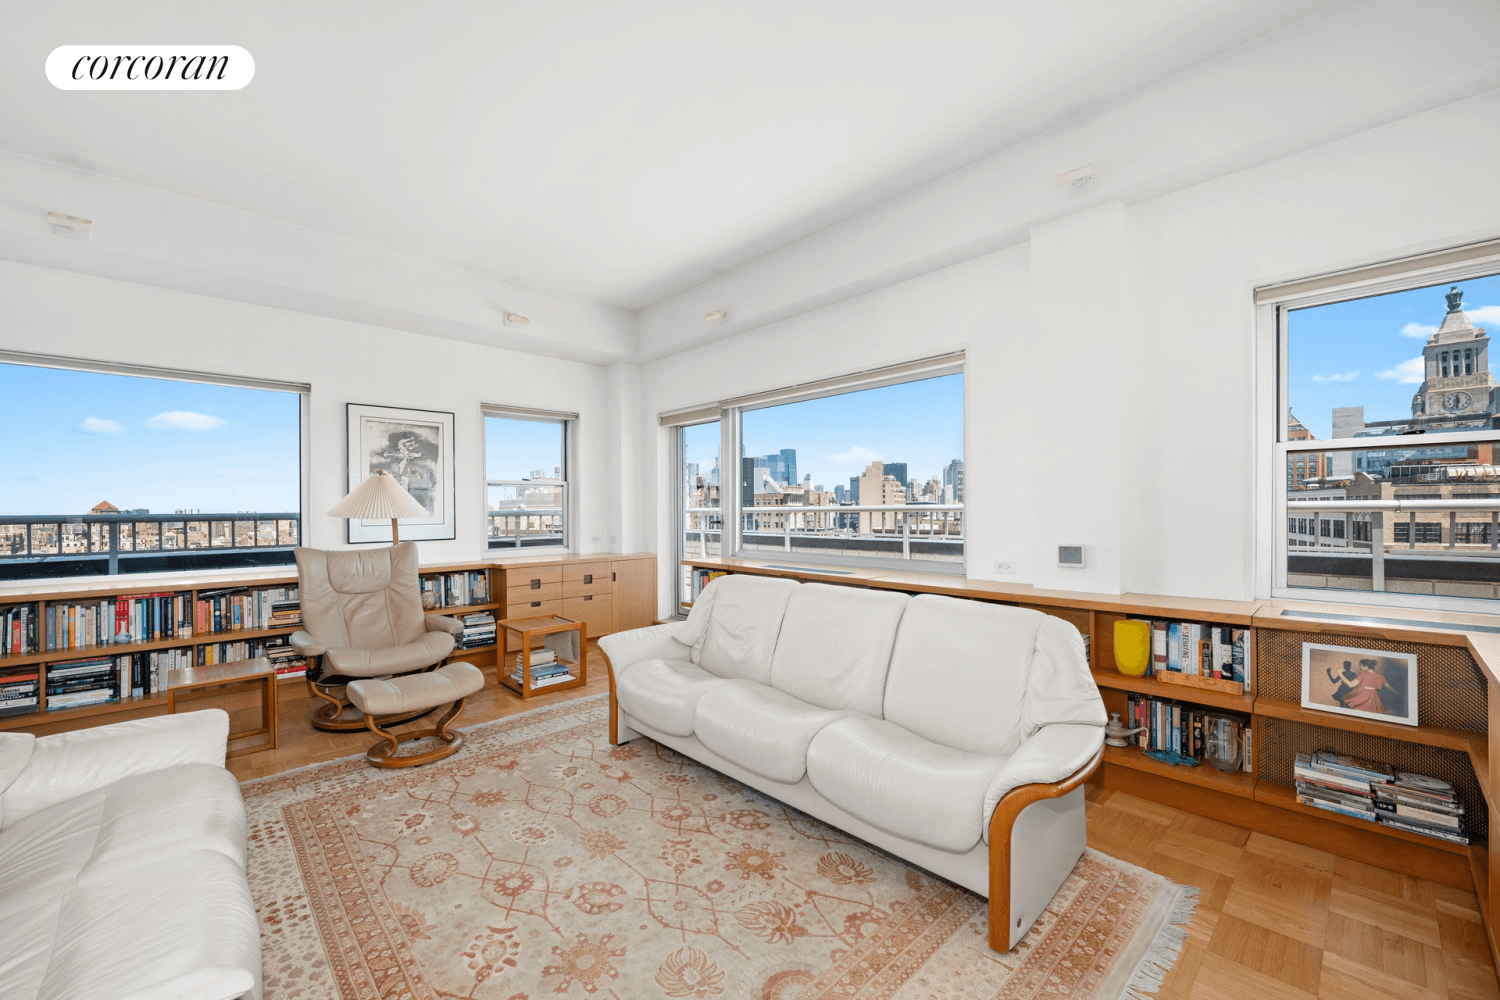 This rarely available 2 bedroom 2 baths penthouse in the highly sought after full service Greenwich Village icon, the Stewart House, is perched in the sky, has unparalleled panoramic views ...